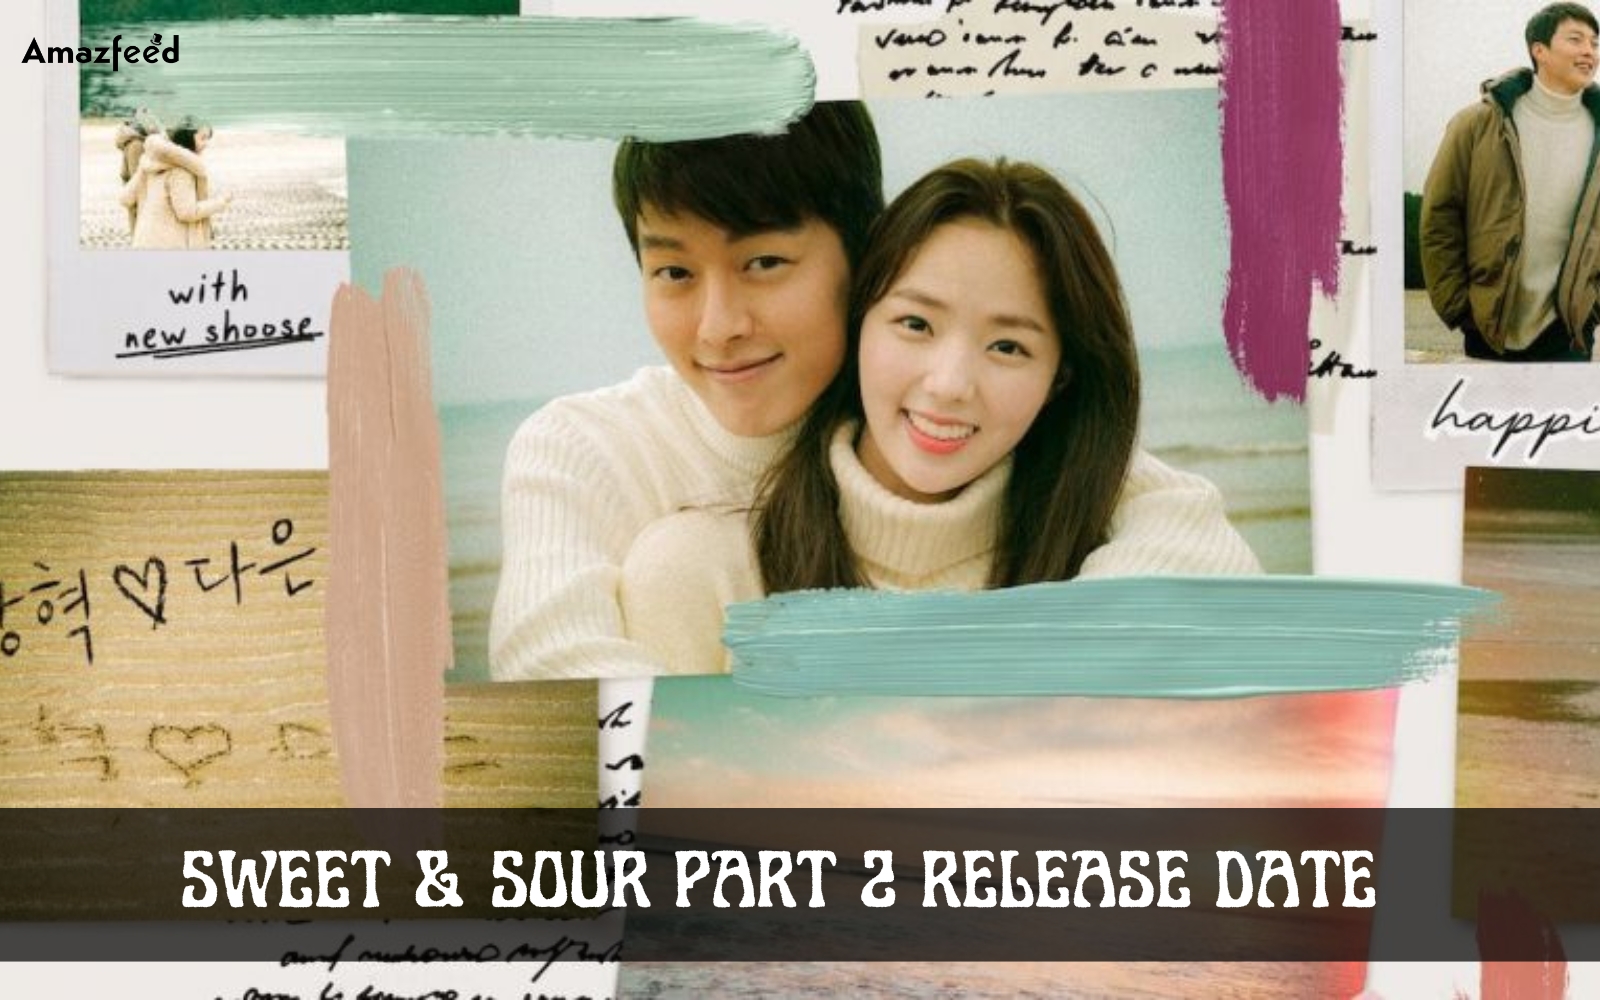 SWEET & SOUR PART 2 RELEASE DATE